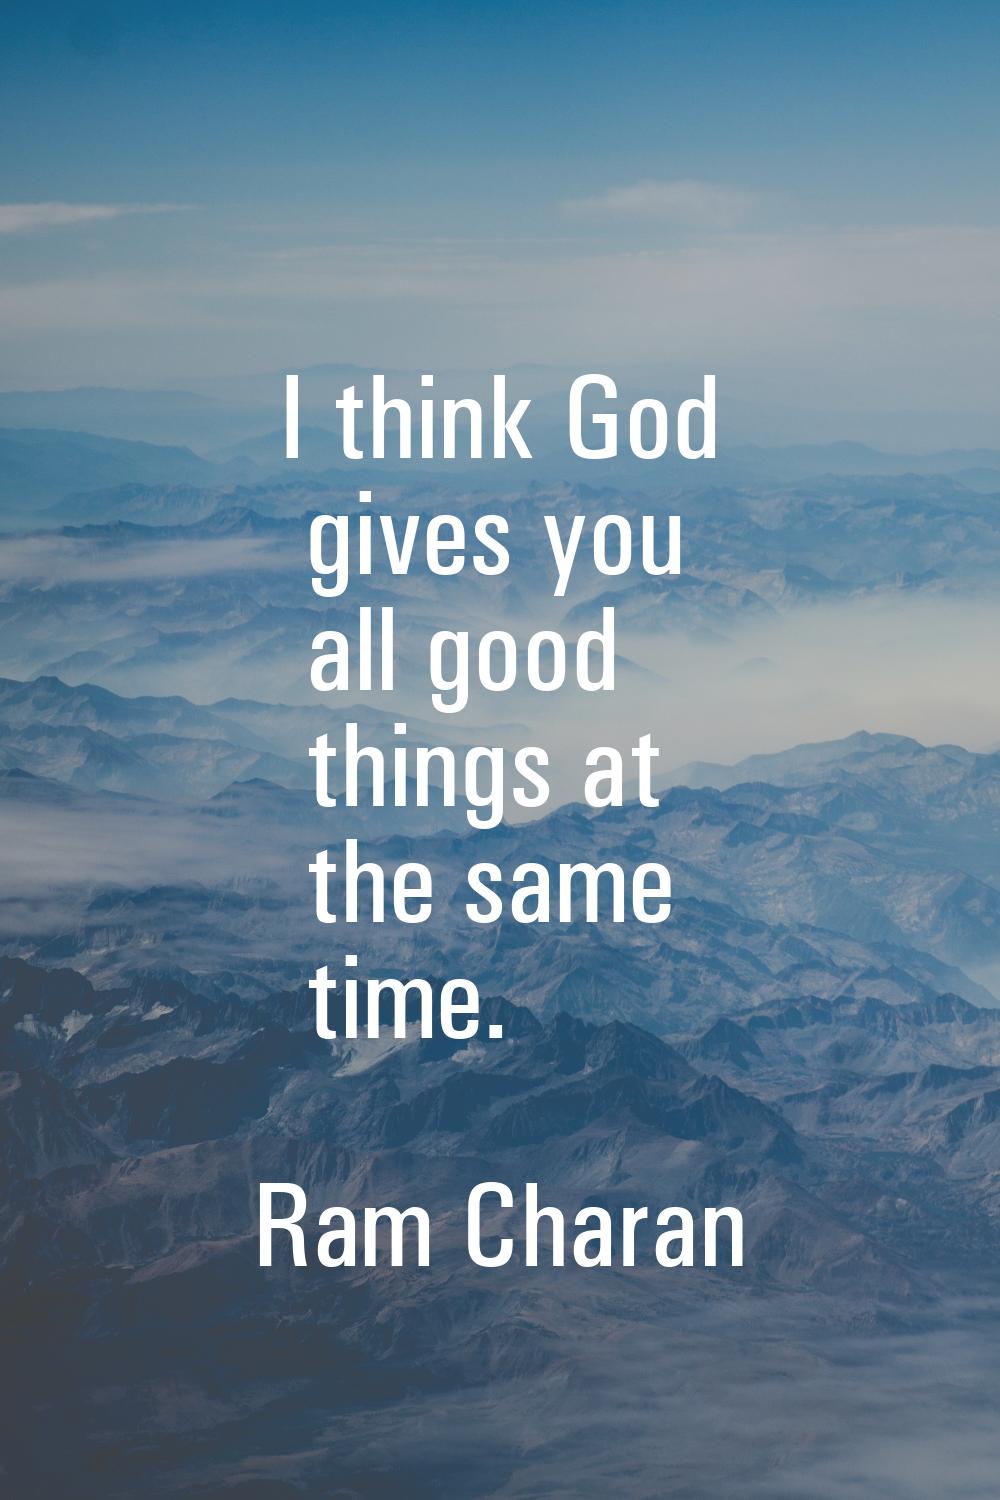 I think God gives you all good things at the same time.